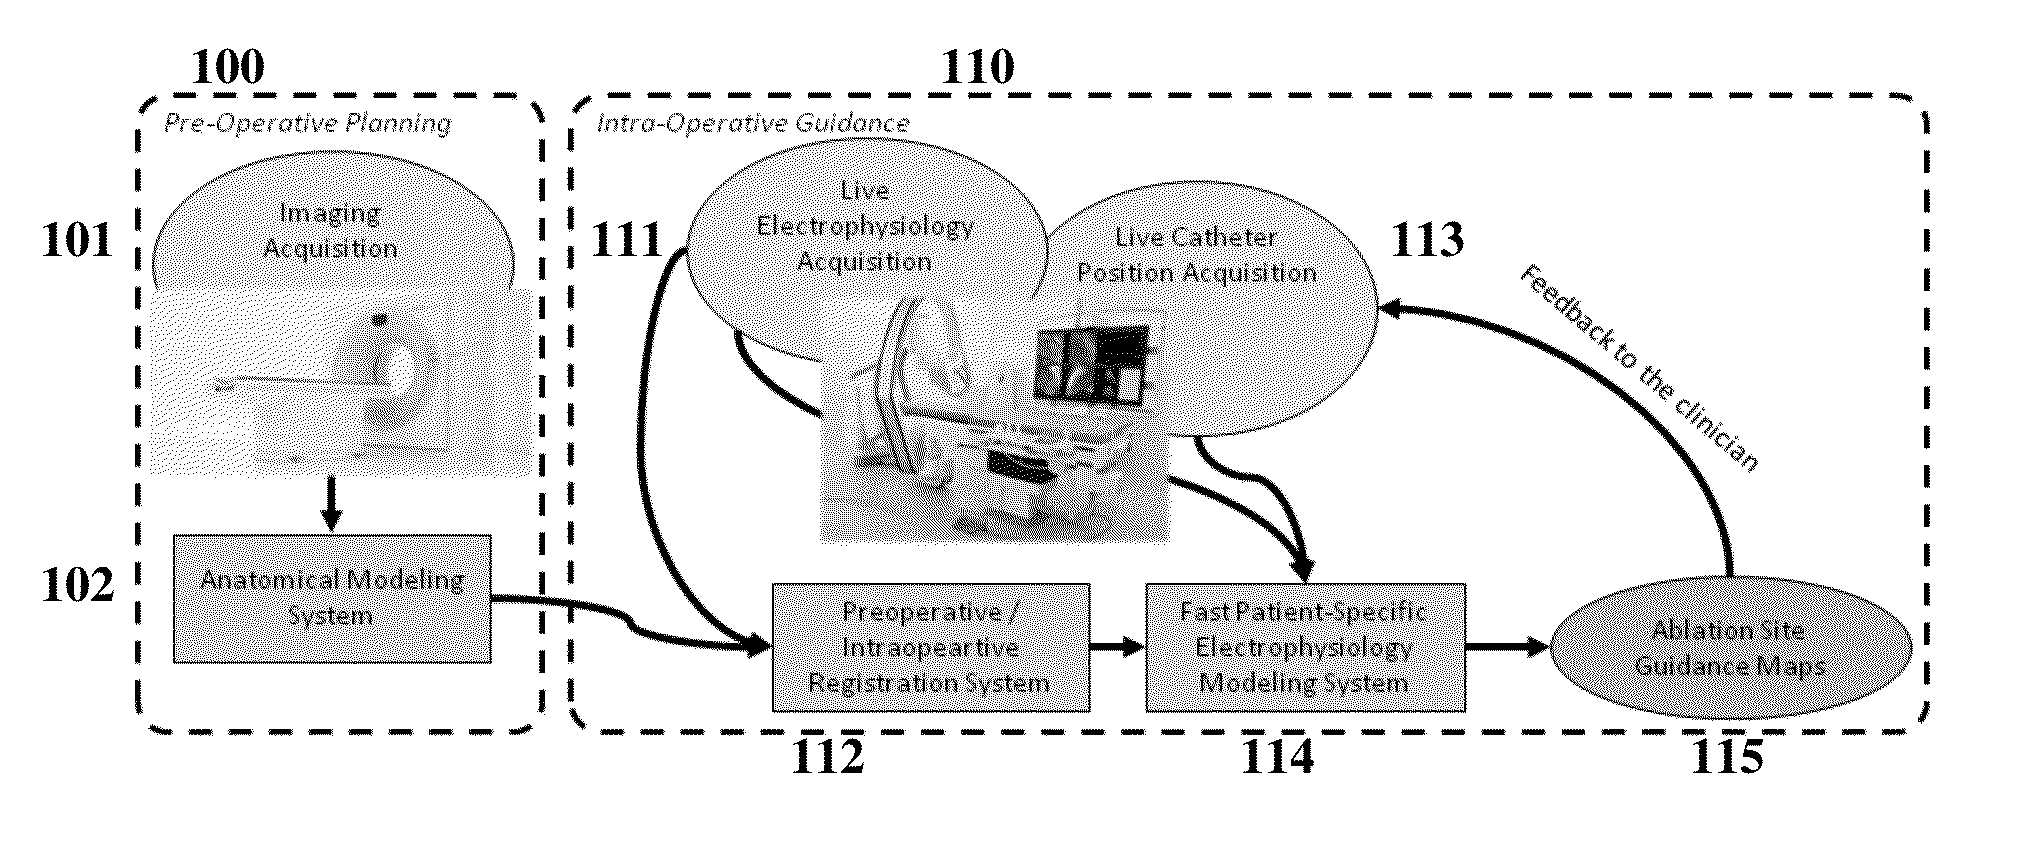 System and Method for Patient Specific Planning and Guidance of Ablative Procedures for Cardiac Arrhythmias